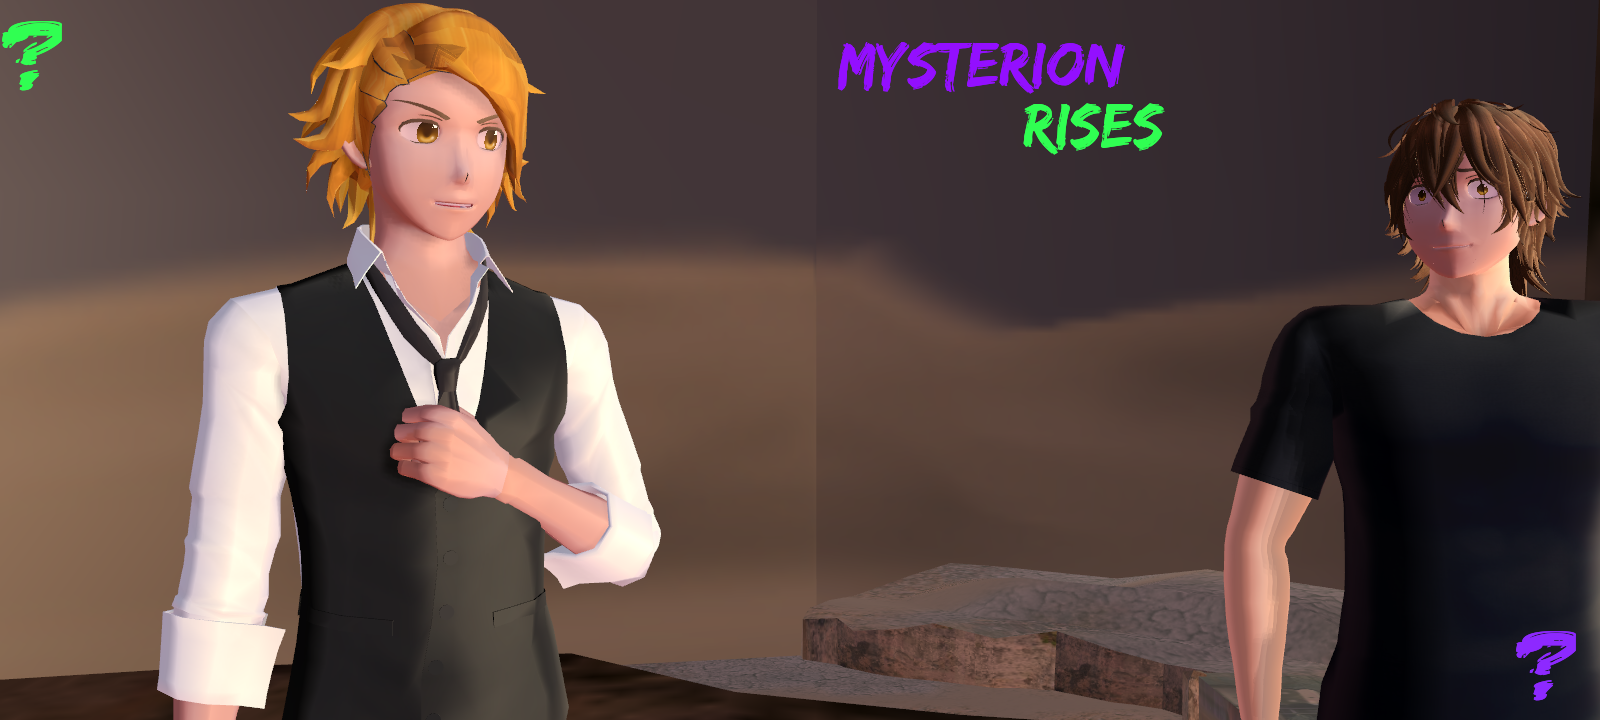 Mysterion Rises Download